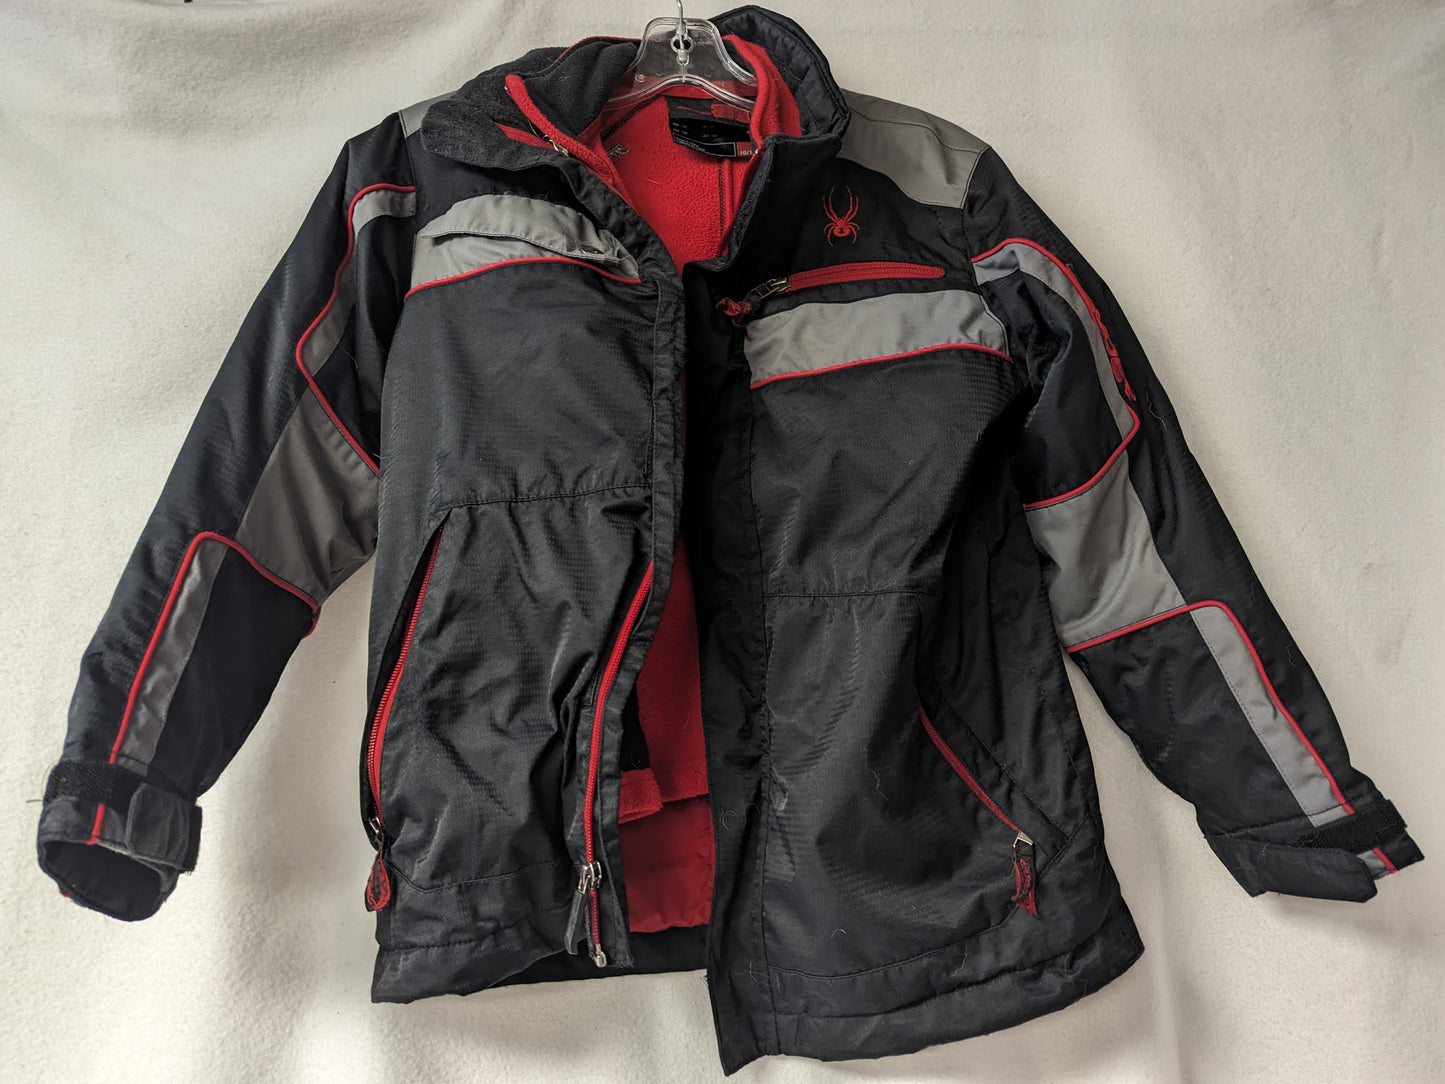 Spyder Insulated Ski/Snowboard Jacket Coat Size Kids Small (10) Color Black Condition Used